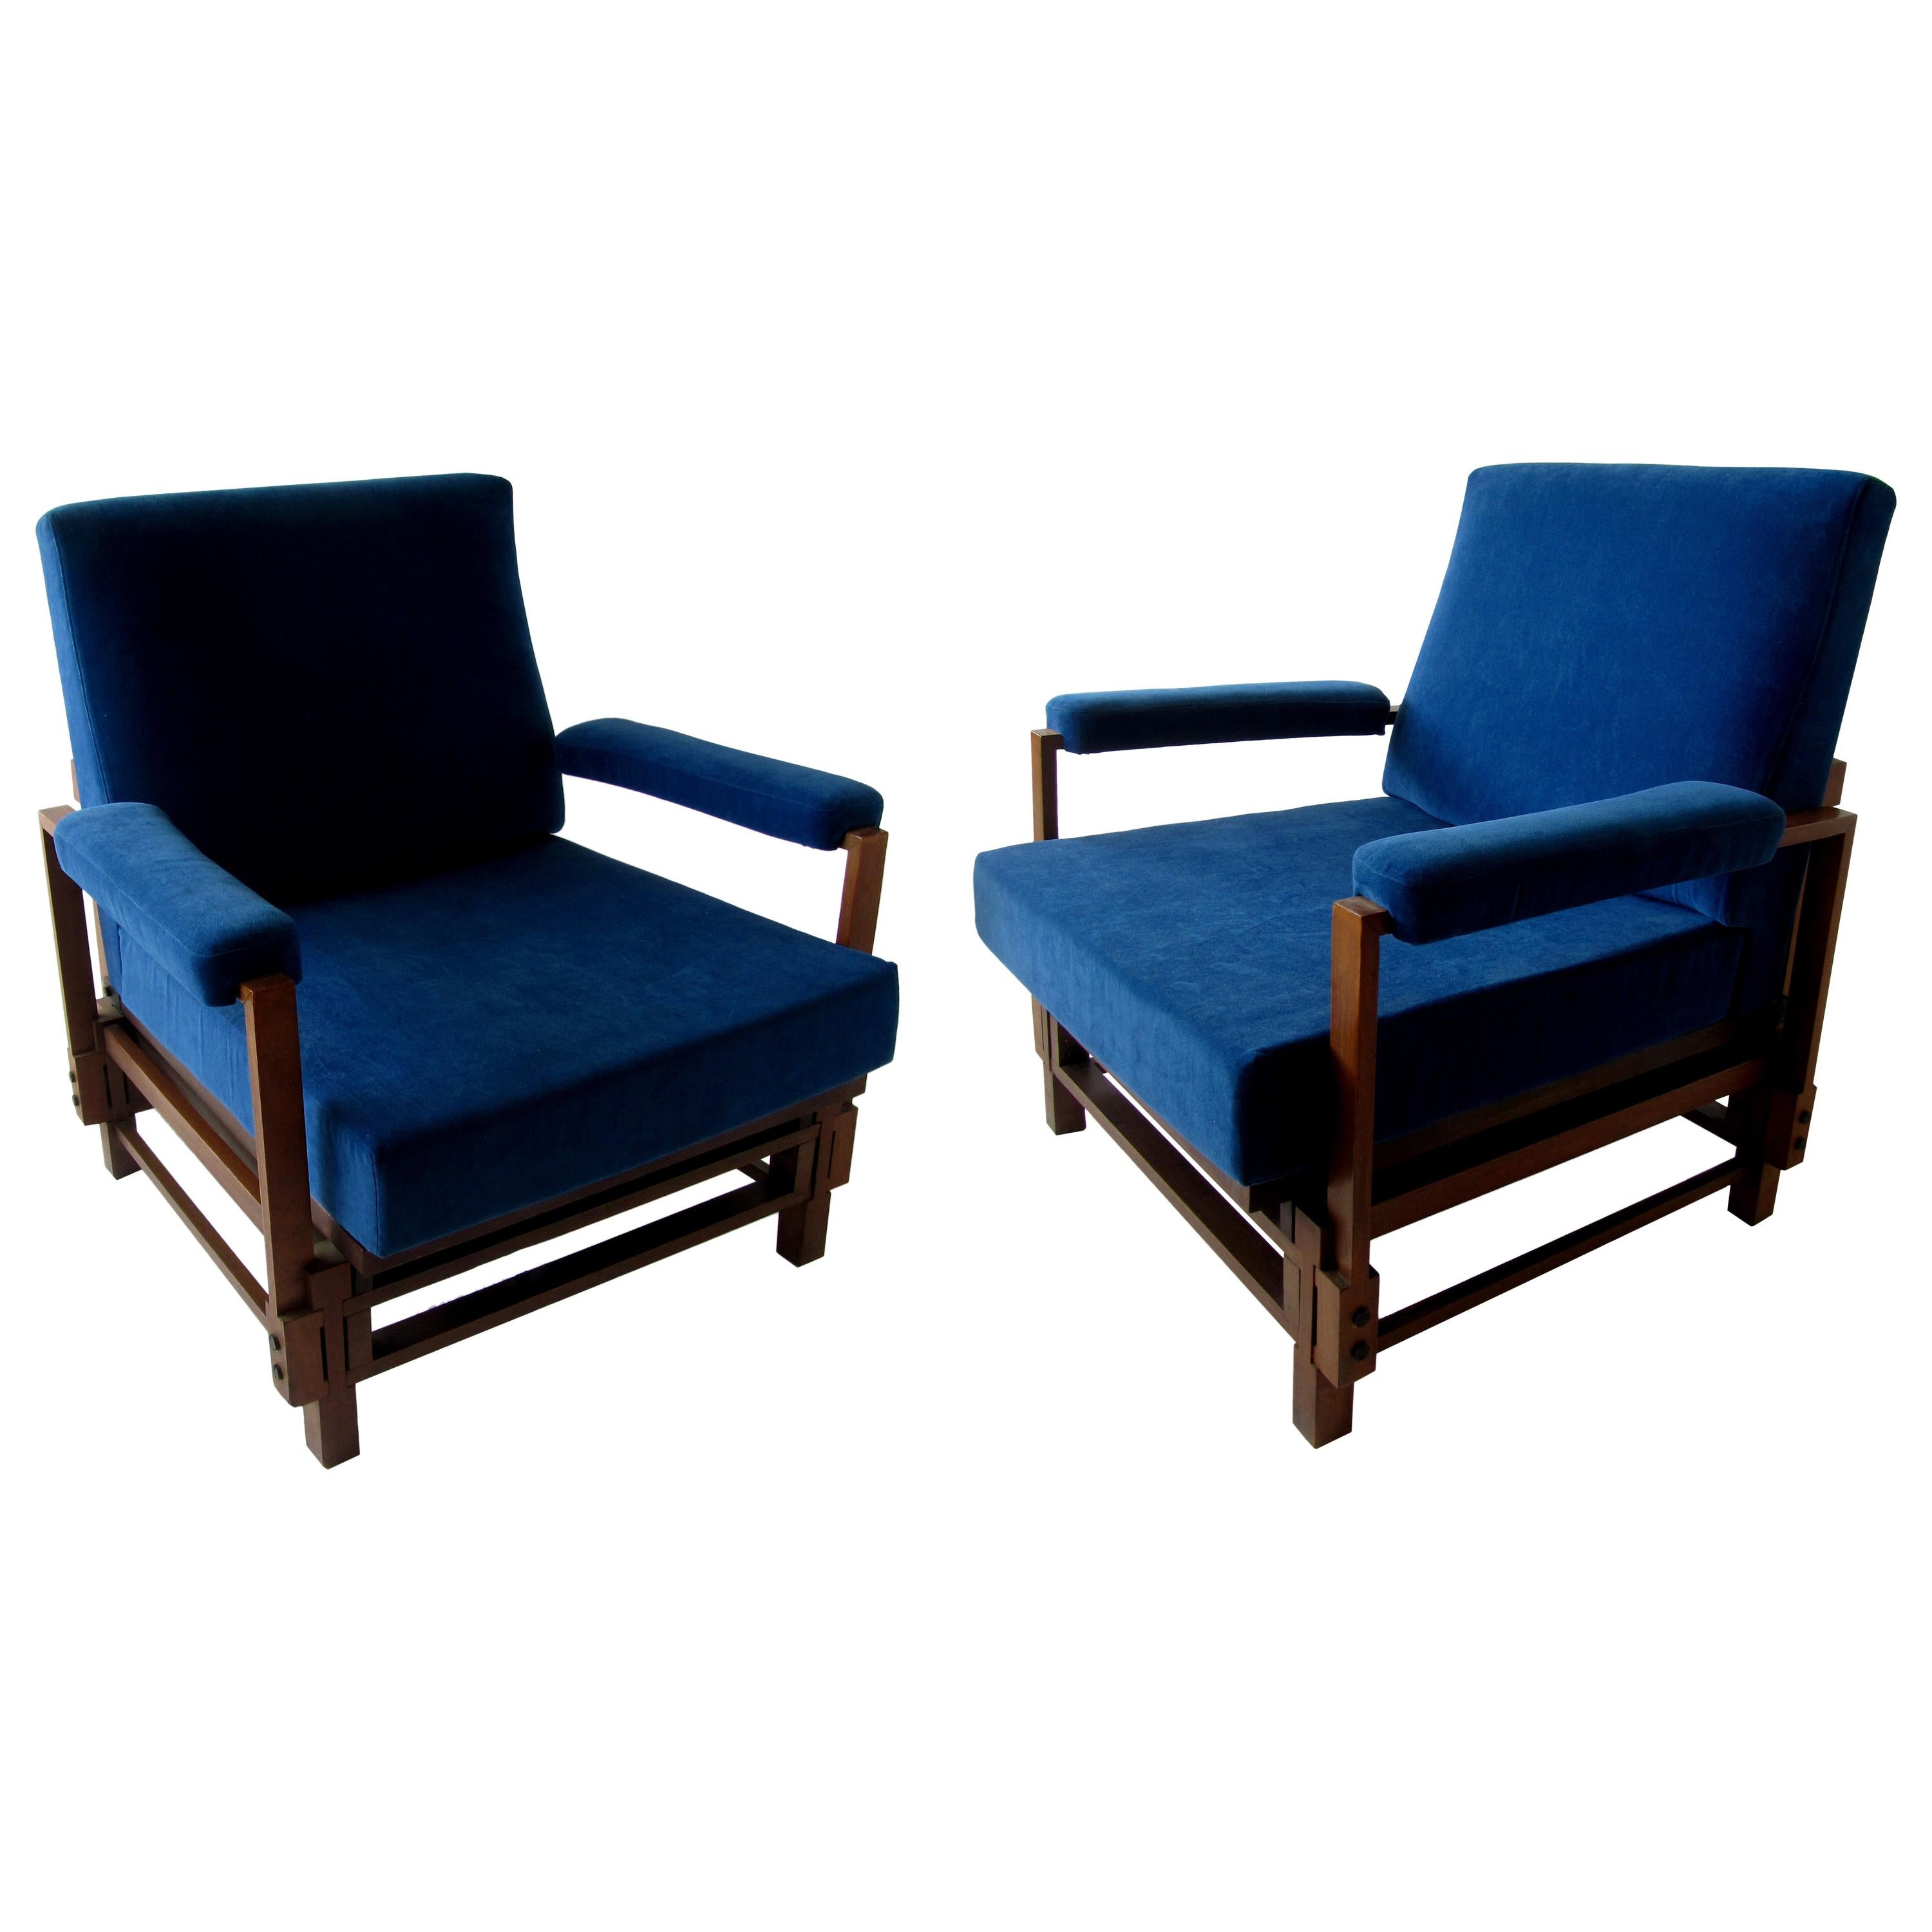 Pair of Italian modern armchairs. Italian furniture manufacturer I.S.A. (Industria Salotti e Arredamenti) -also known as ISA, ISA Bergamo and ISA, Italy, was founded in Ponte San Pietro a village outside of Bergamo sometime near the late 1940s. The